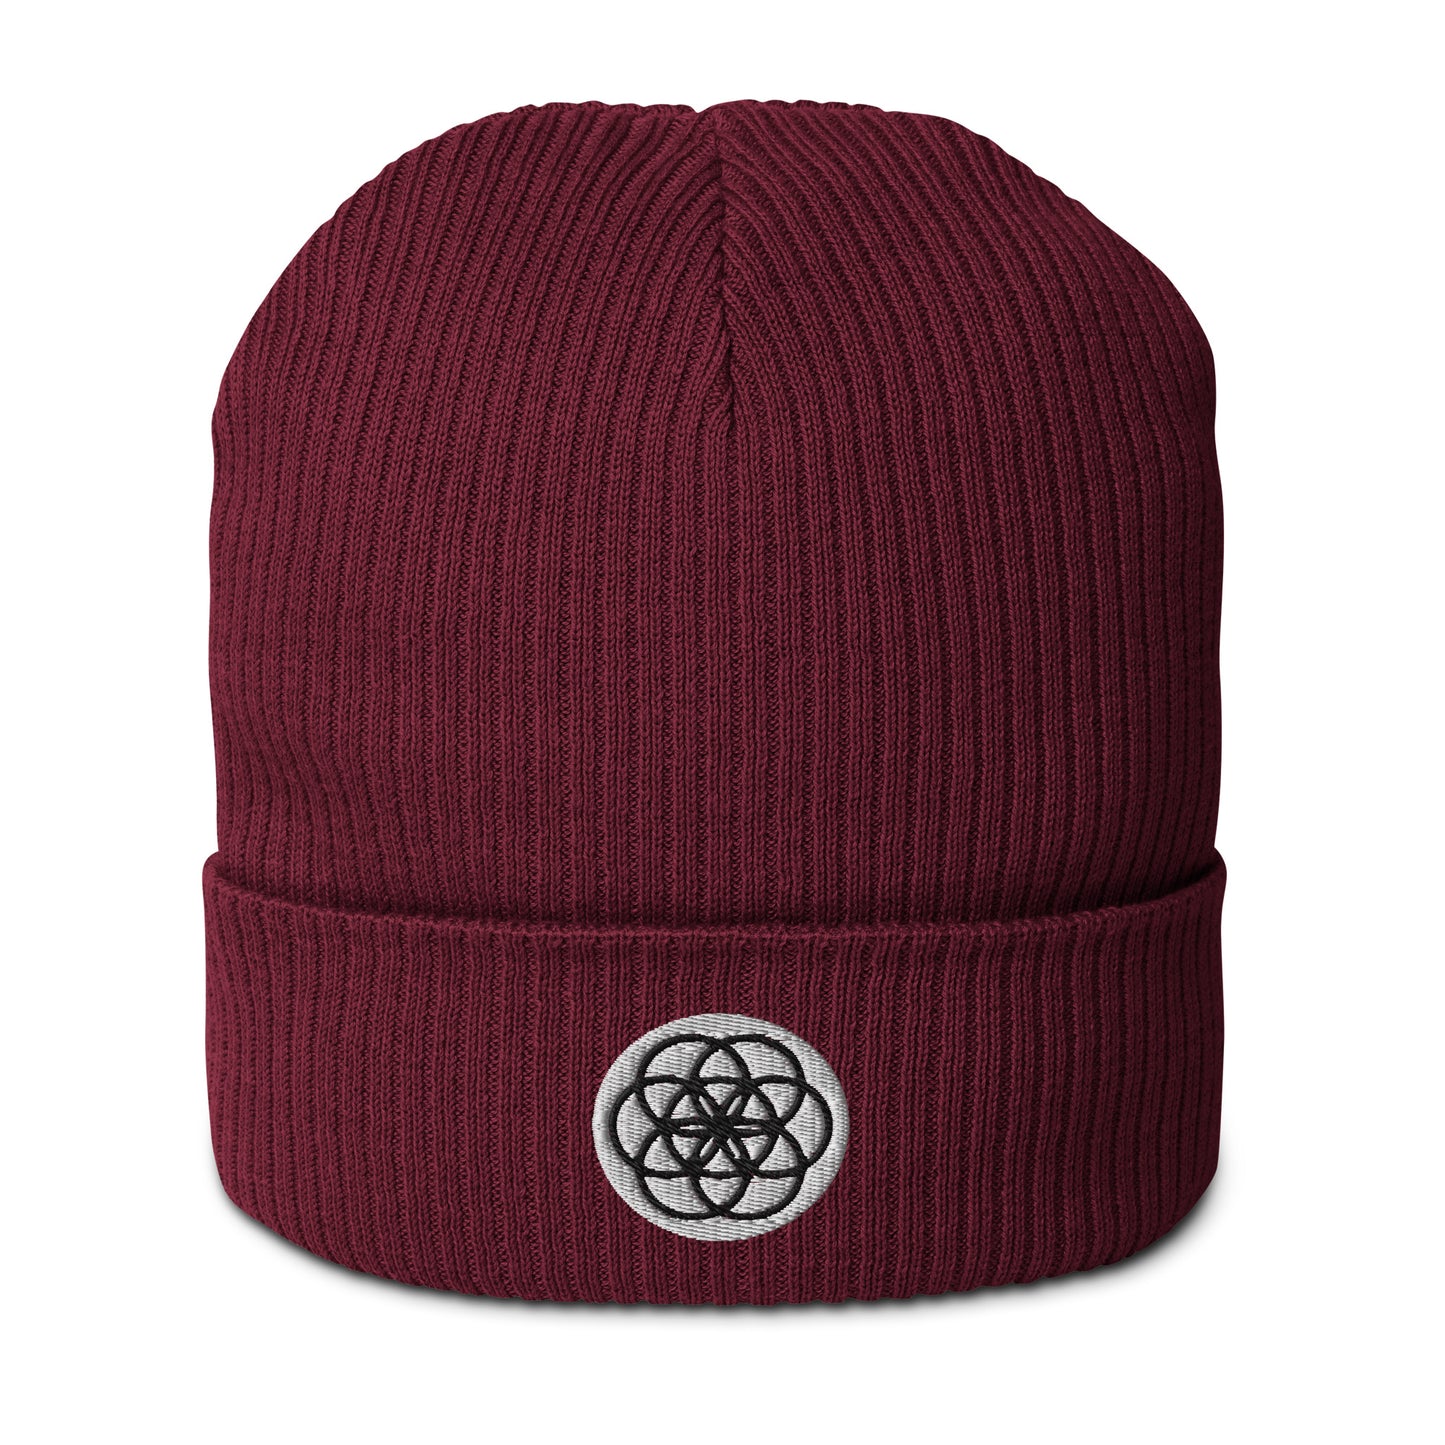 The Seed of Life beanie in Wine Red is made from 100% organic cotton and it’s the perfect cozy addition to your energetically elevated wardrobe. The seed of life is an ancient and meaningful sacred geometry symbol that Whether you're stargazing or navigating the urban jungle, let this beanie remind you of your place in the cosmic tapestry.